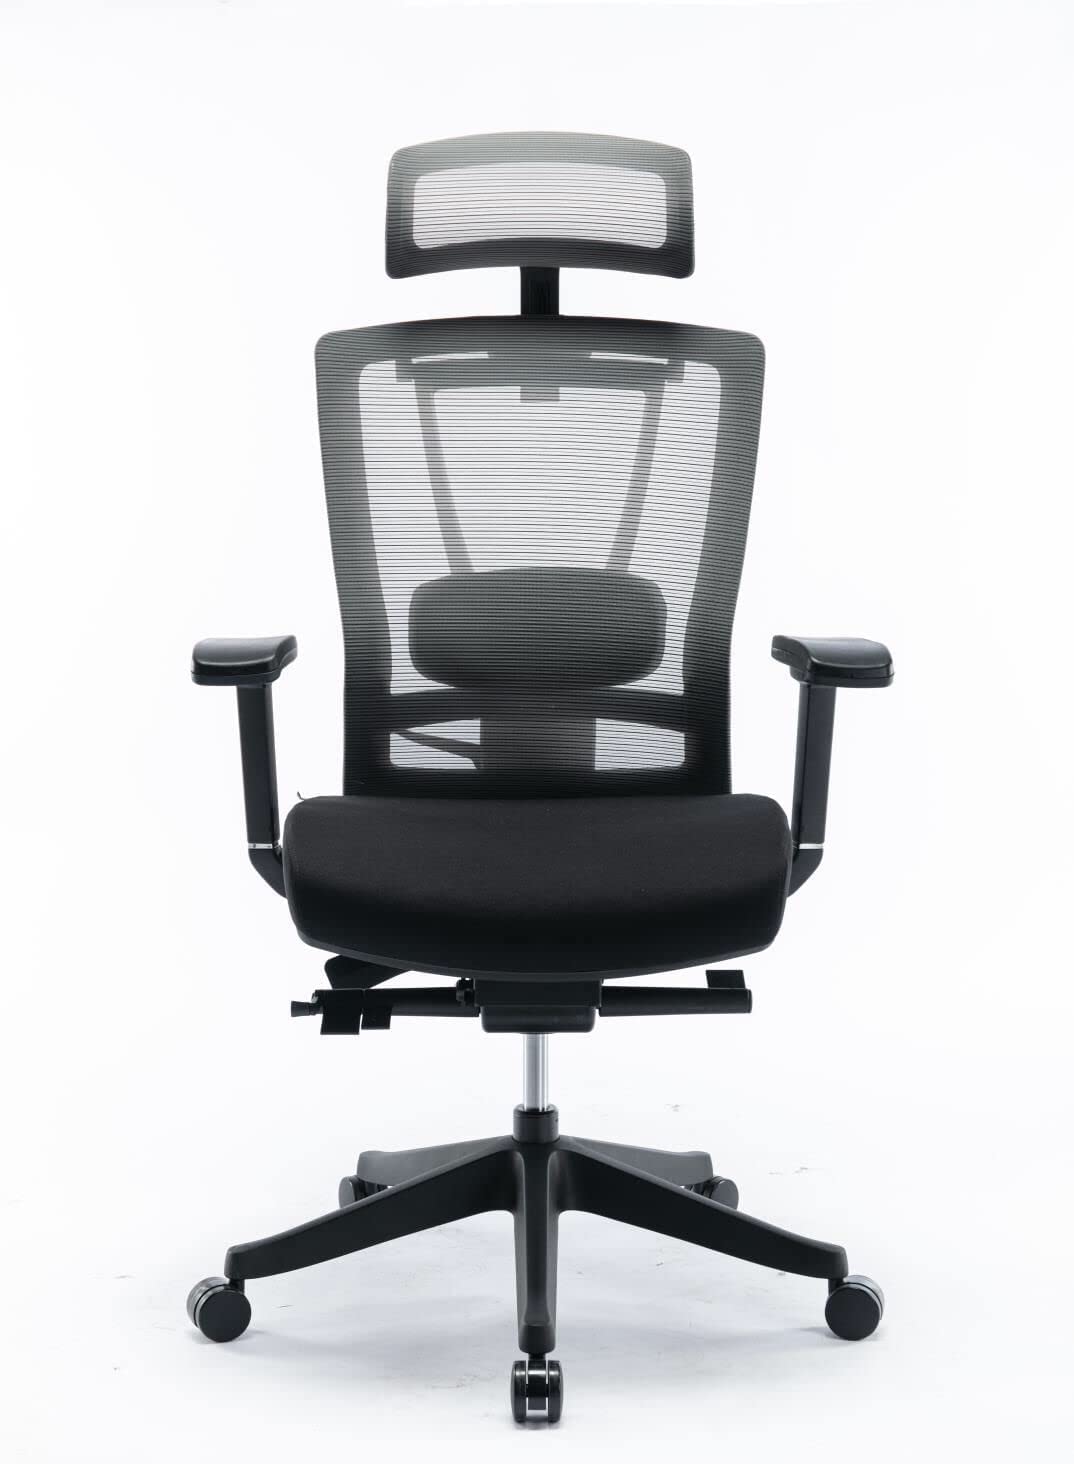 HALO Chair Premium Ergonomic Gaming & Office Chair with Multi Adjustable Features by Navodesk Pure Black